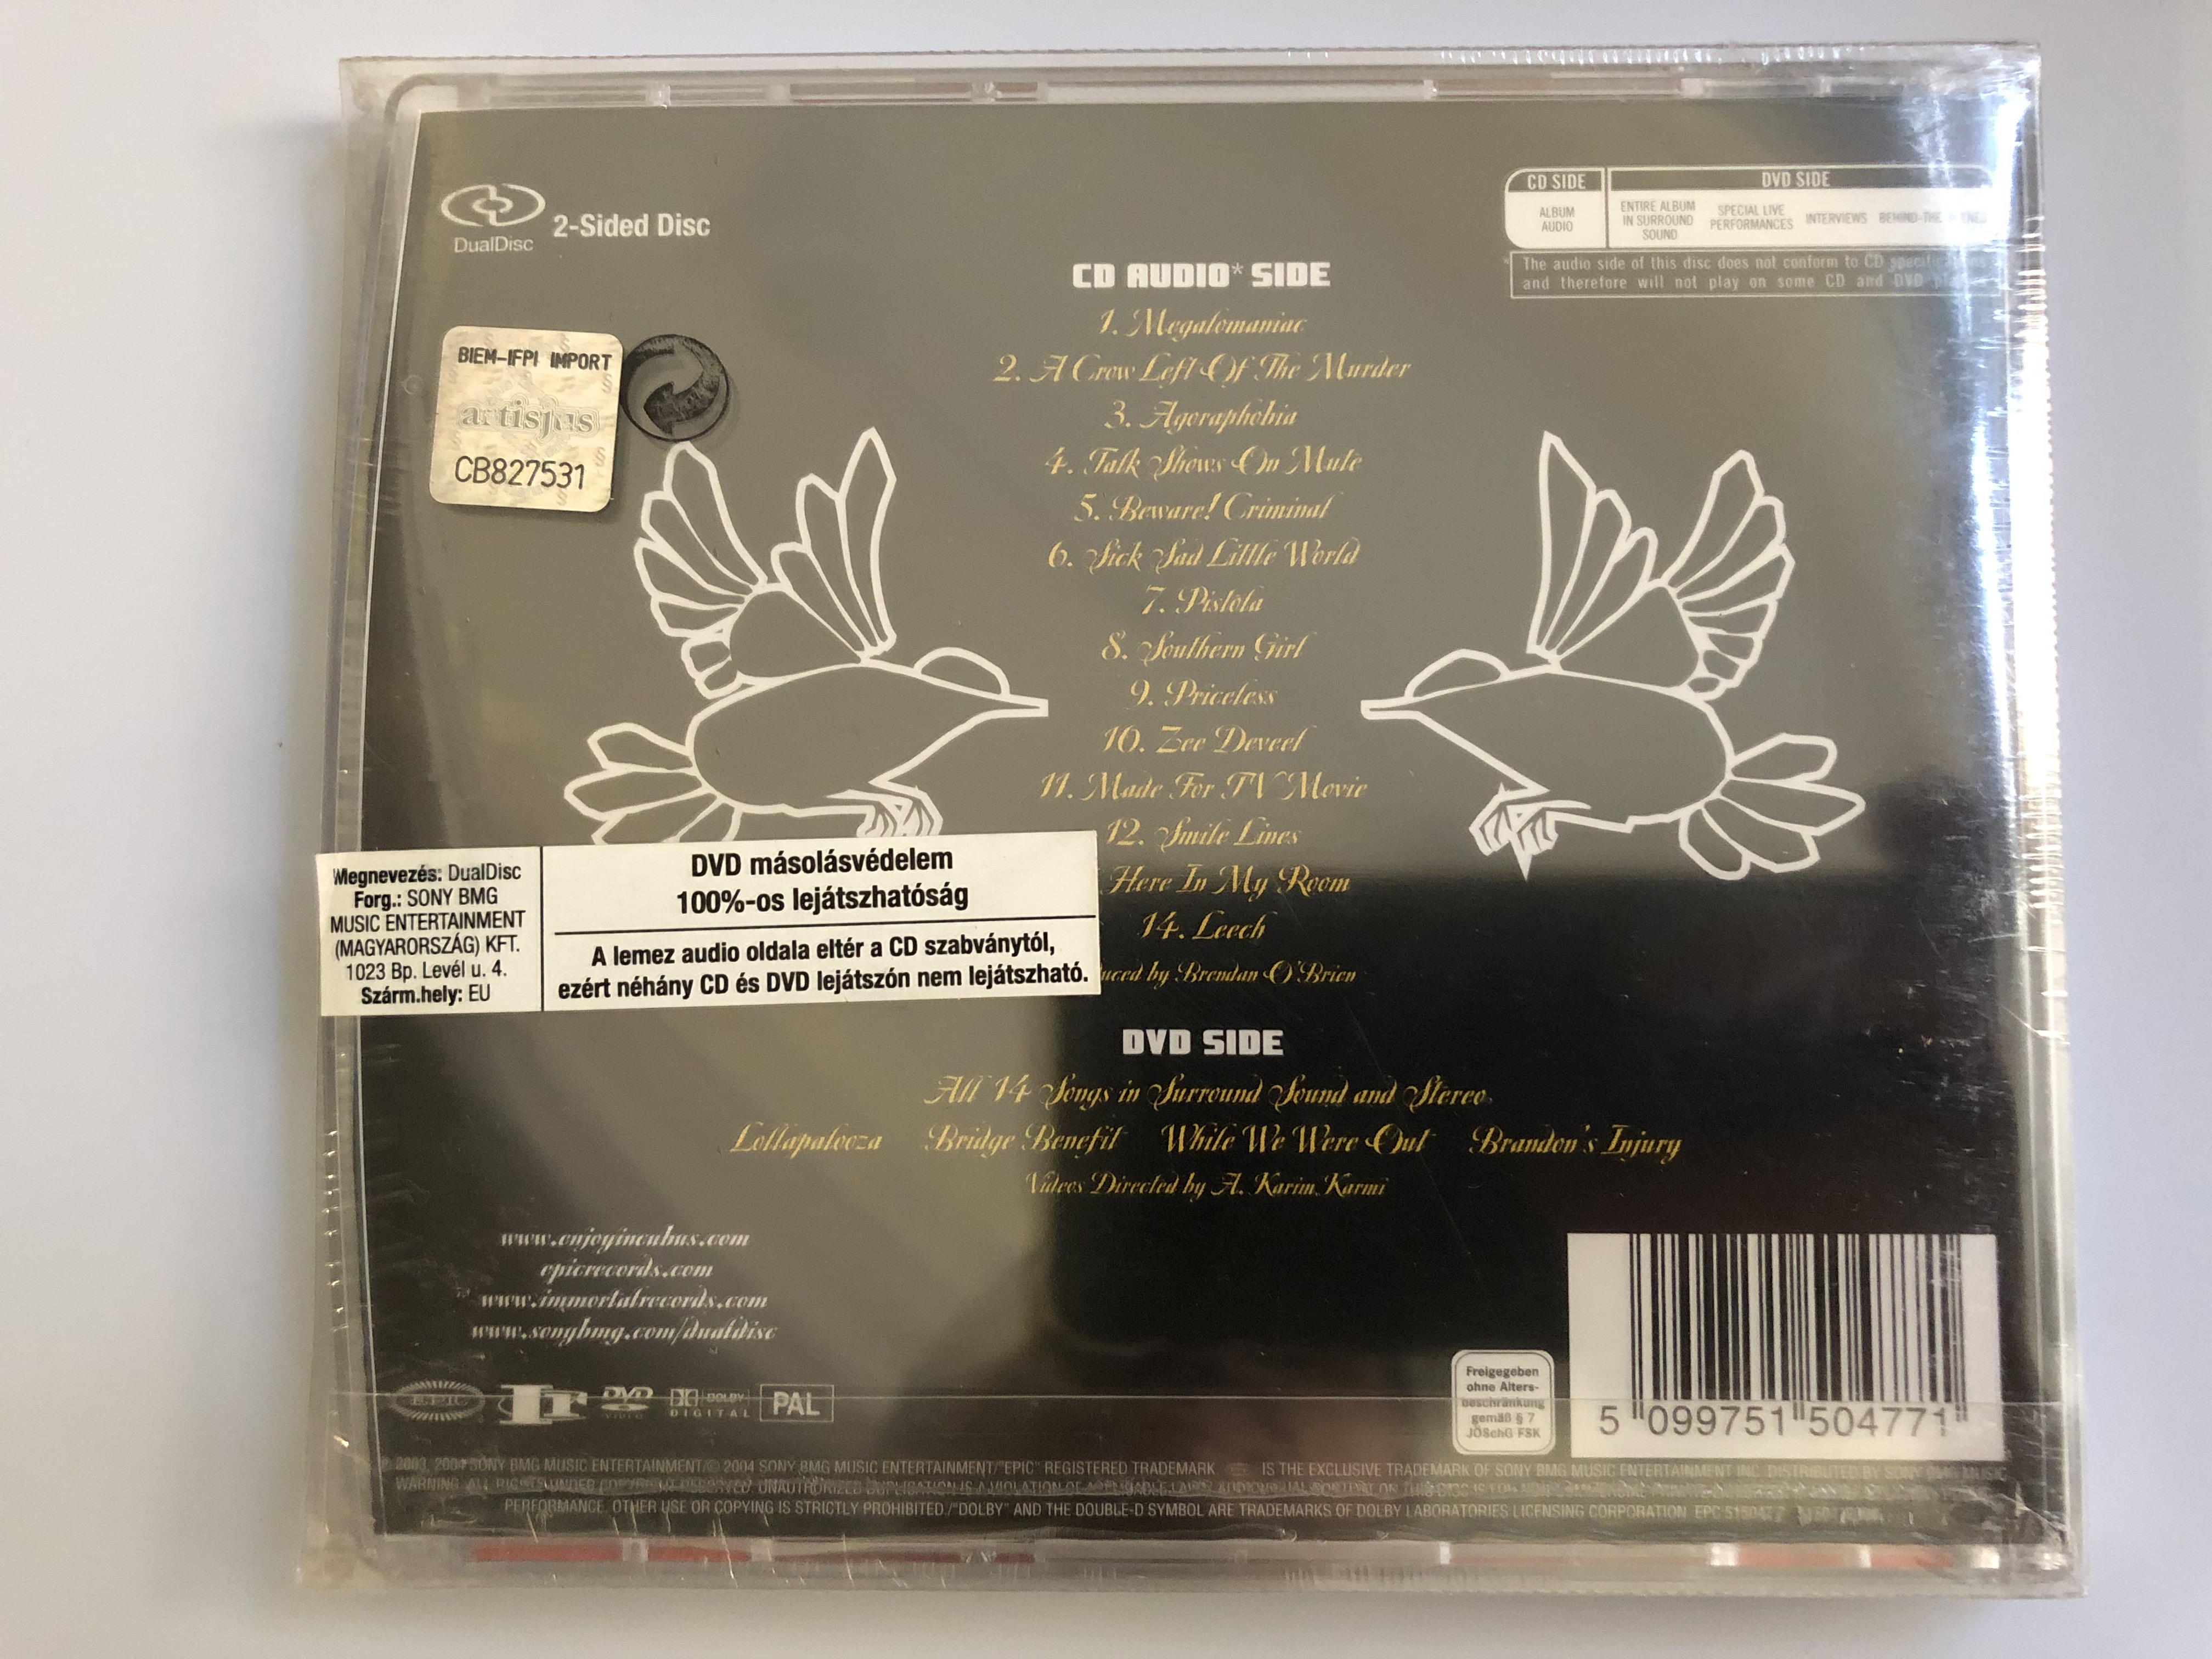 incubus-a-crow-left-of-the-murder...-one-disc-two-experiences-dual-disc-featuring-the-smash-hits-talk-shows-on-mute-and-megalomaniac-epic-audio-cd-dvd-2005-epc-515047-7-.jpg